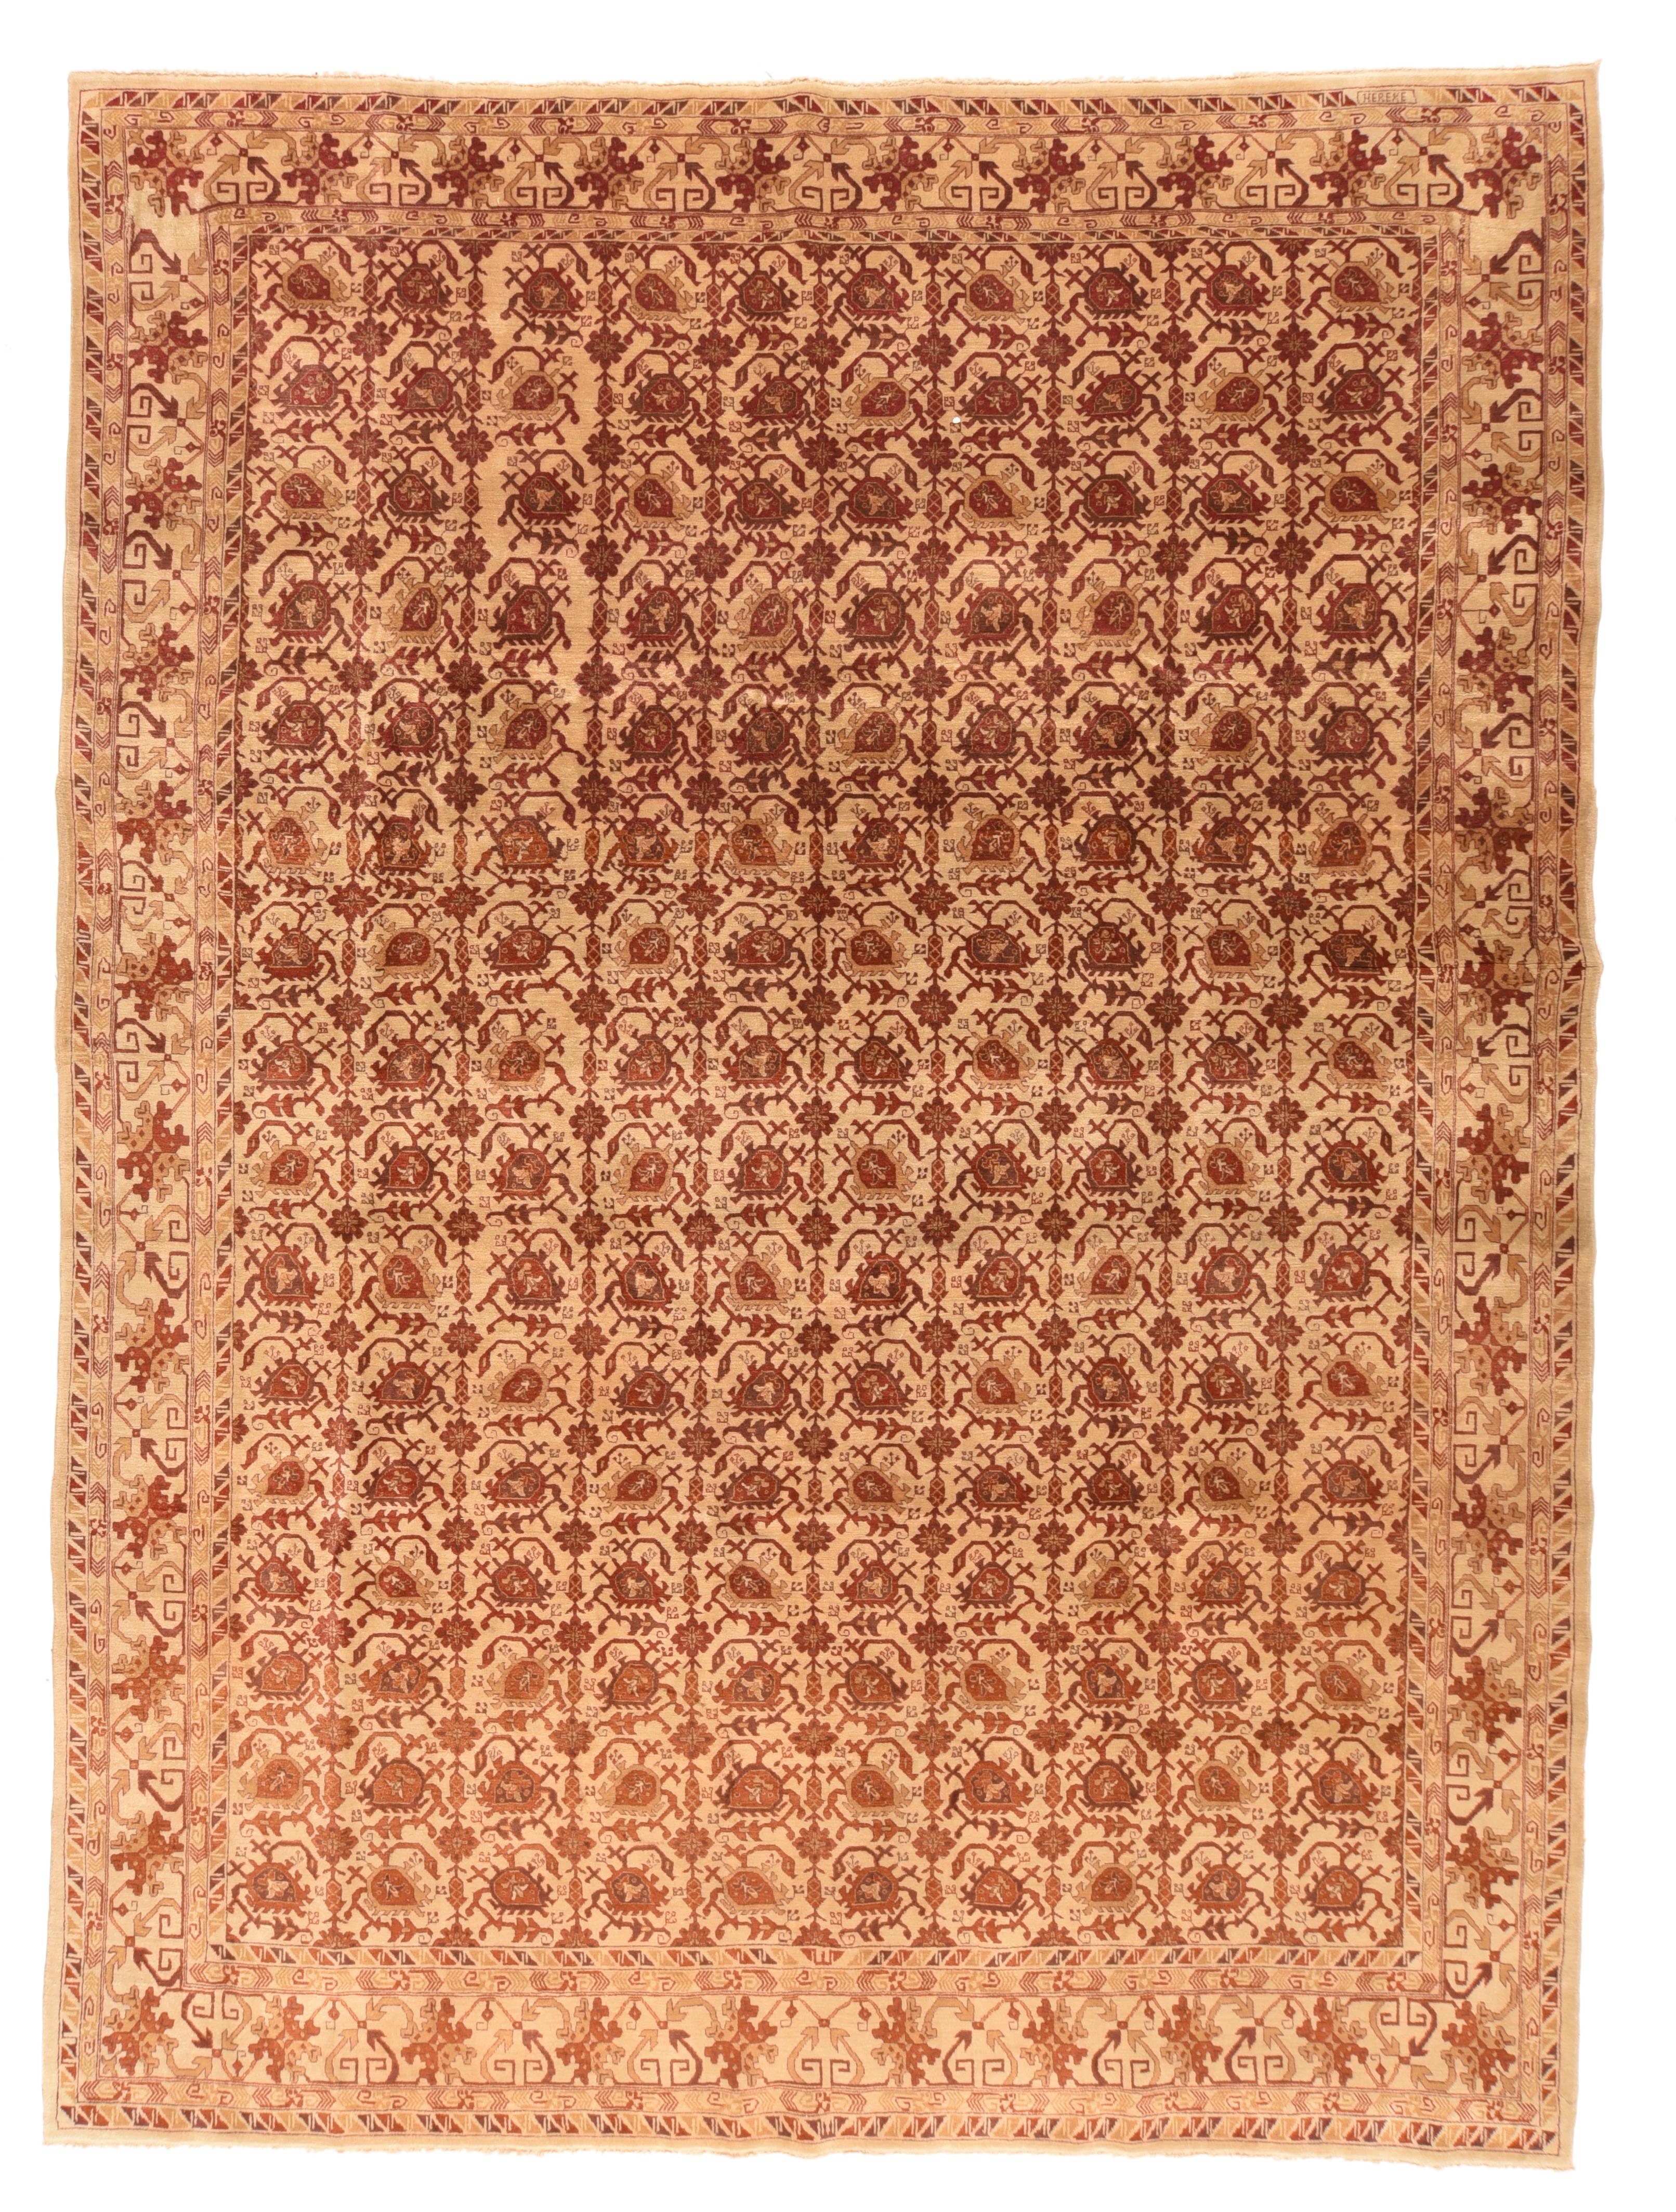 Antique Hereke Rug In Excellent Condition For Sale In New York, NY